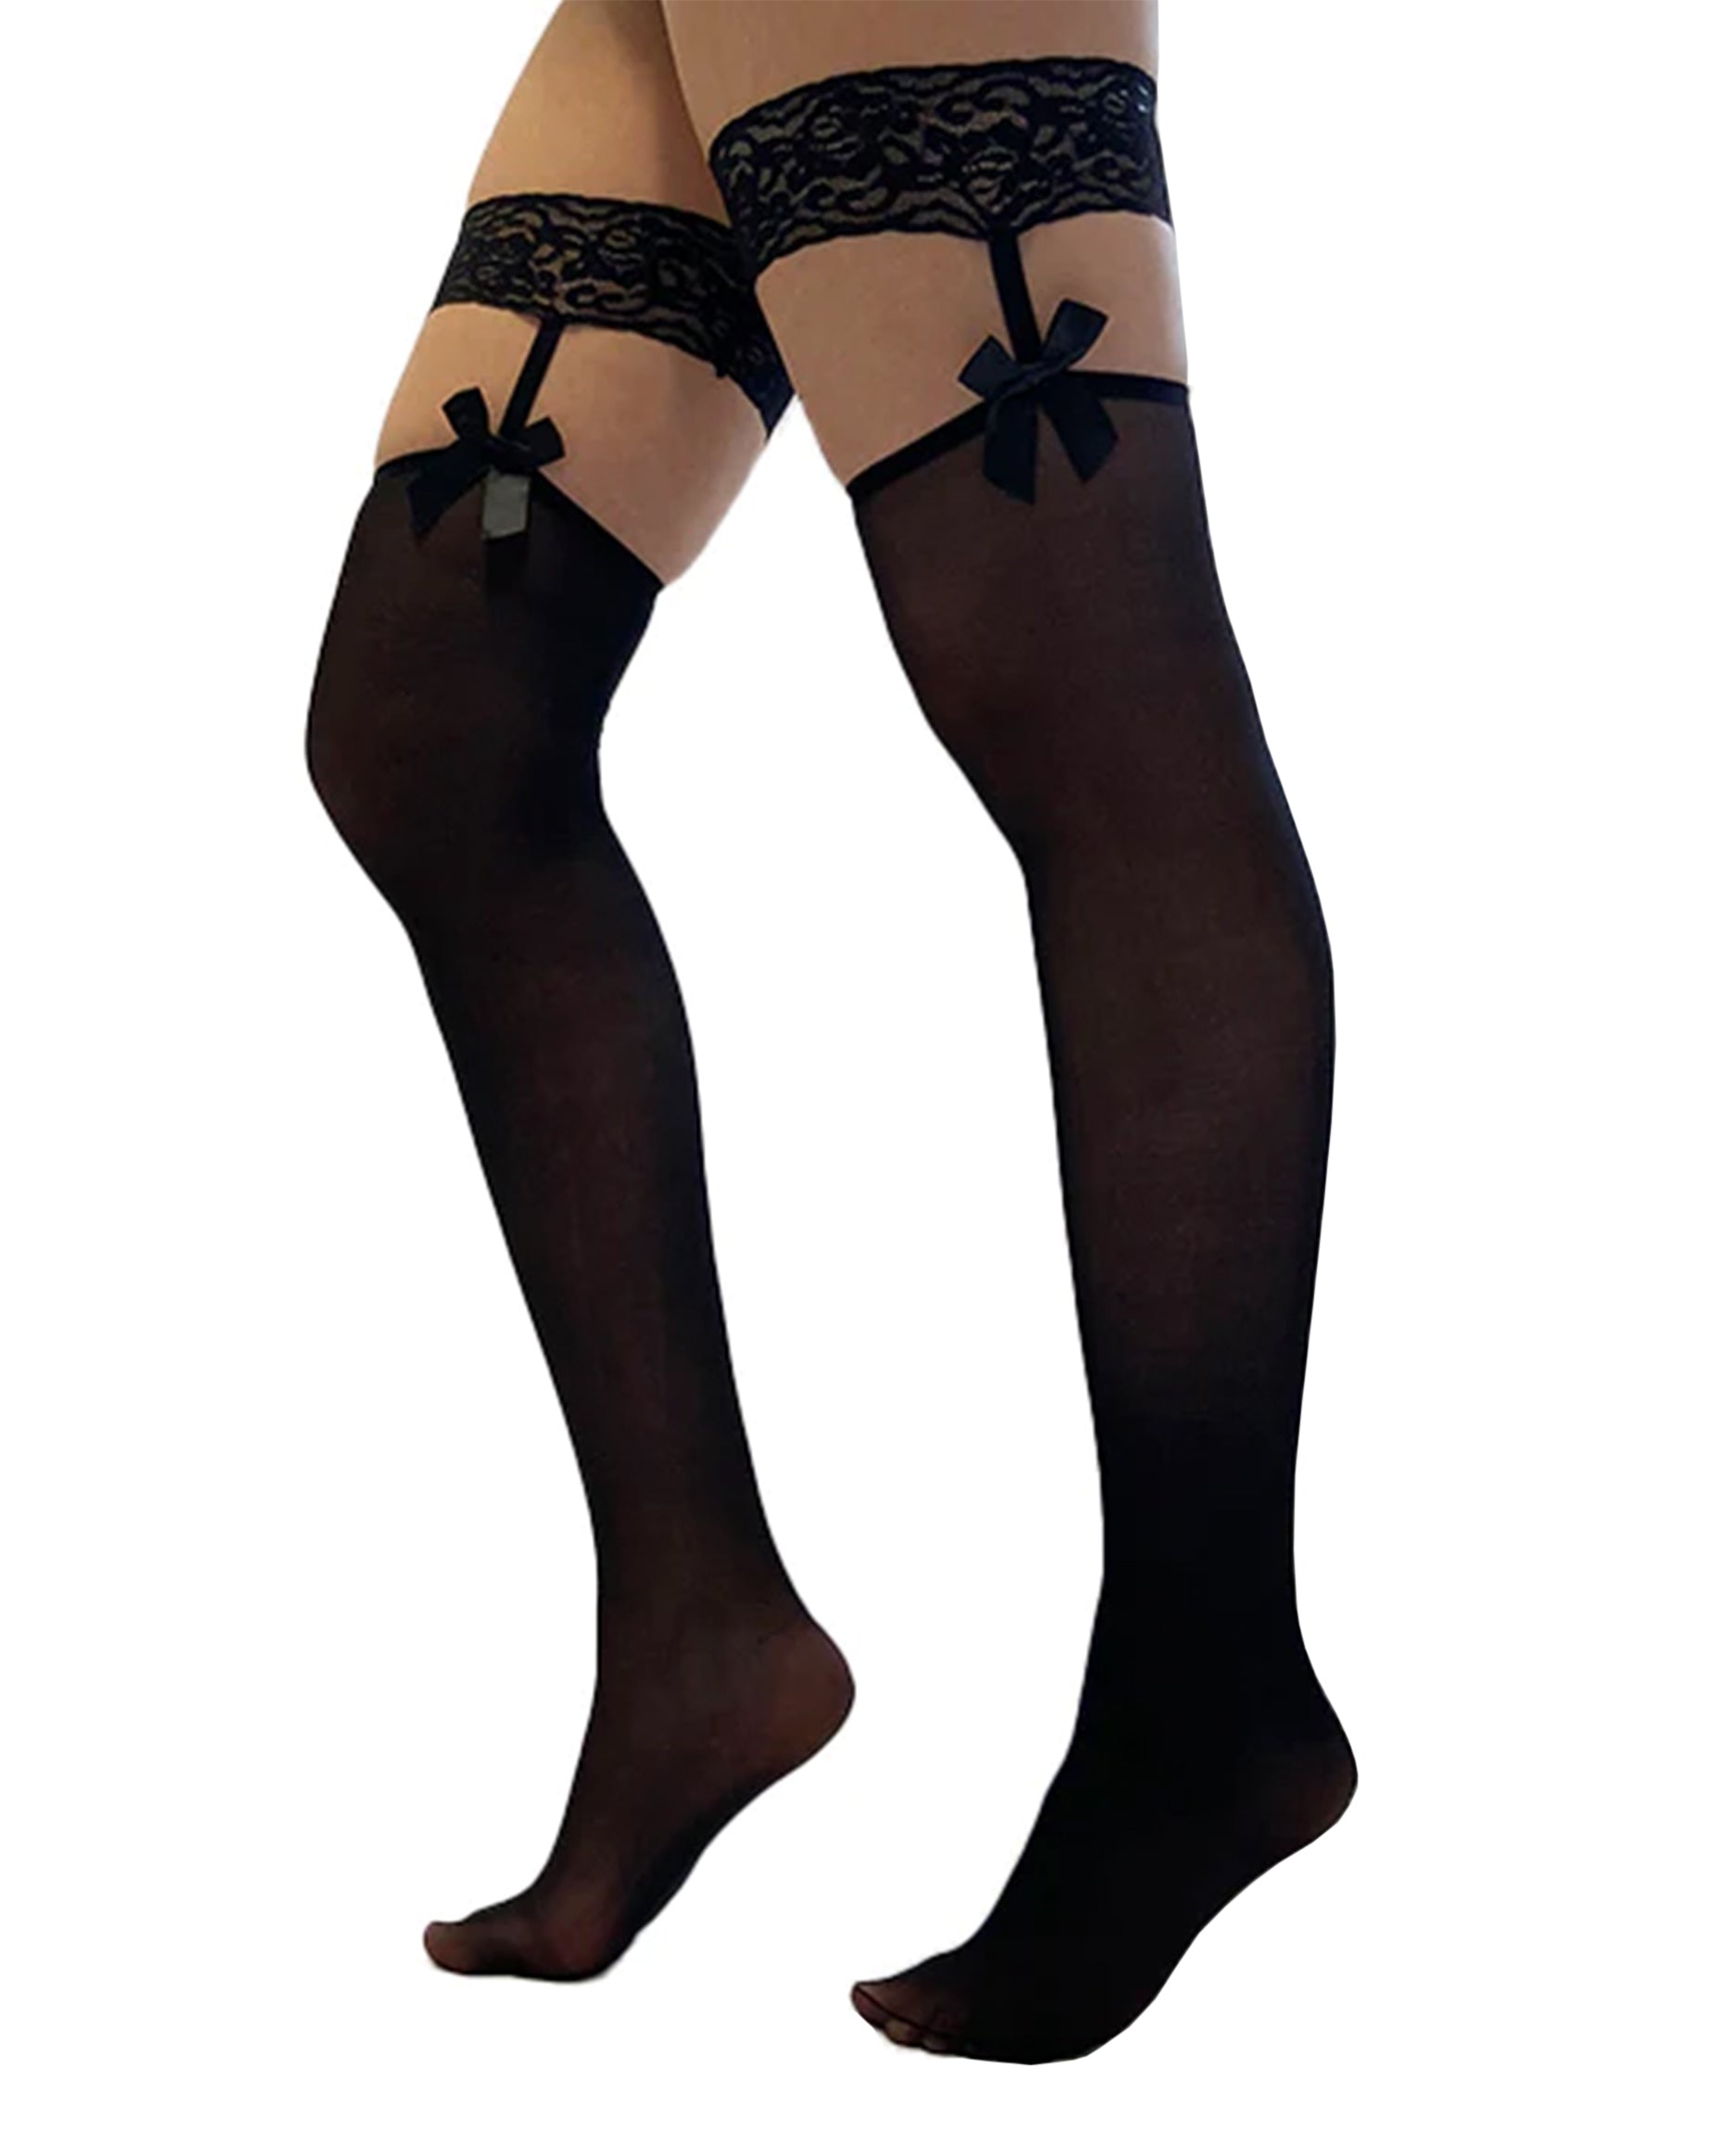 Pamela Mann Lace & Bow Garter Stockings - Black lace hold-up thigh bands with straps and bows attached to opaque stockings.